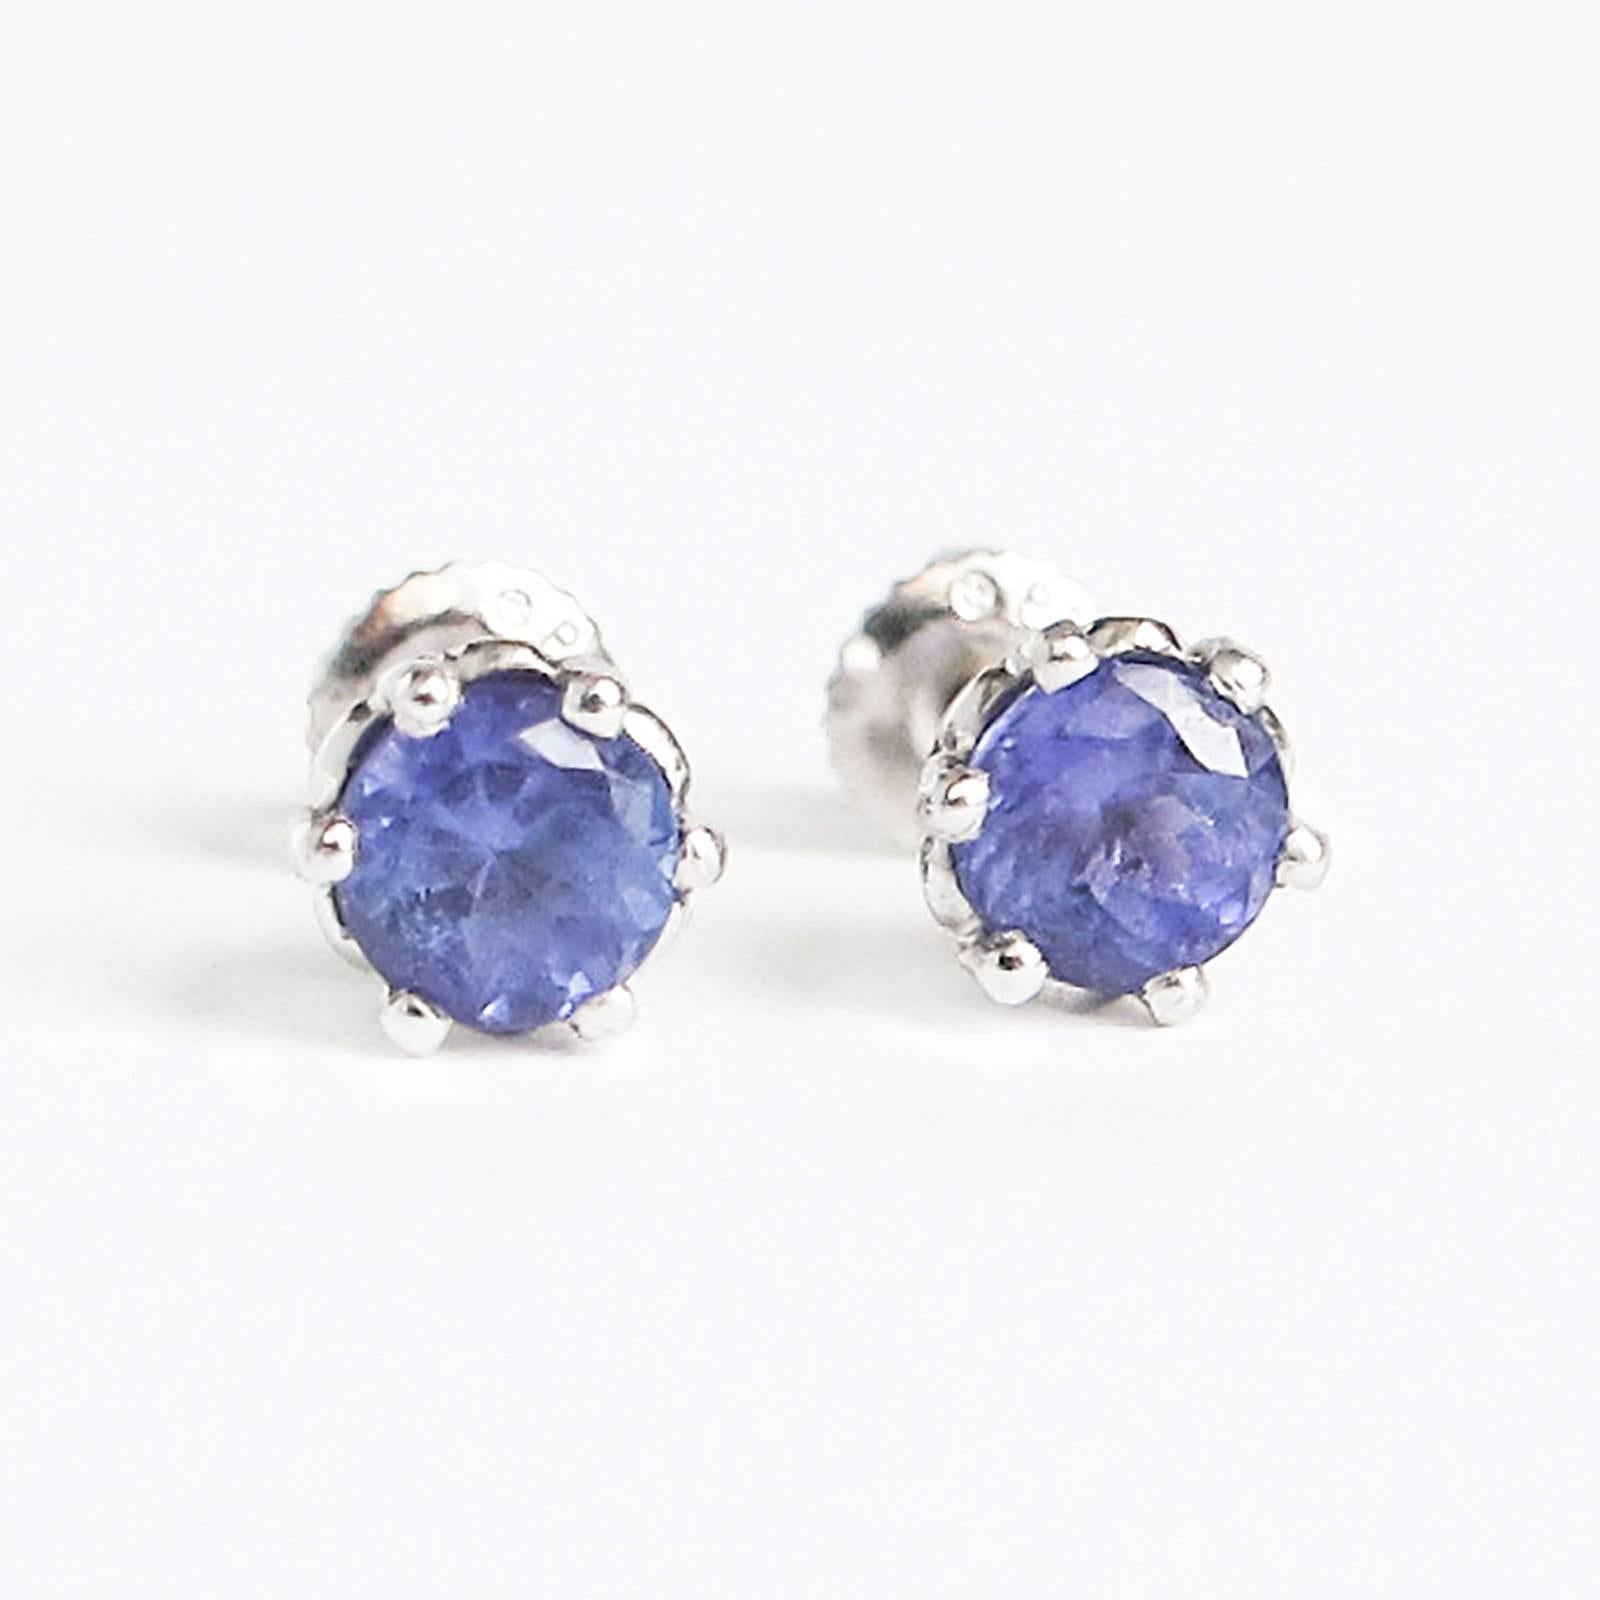 Stunning Platinum stud earrings are set with natural Tanzanite gemstones measuring 5.85mm x 3.80mm (nominal average) total 1.75 carat by gauge and formula.

The Tanzanites are round, mixed cut and well matched. Very nicely mounted in Platinum cups